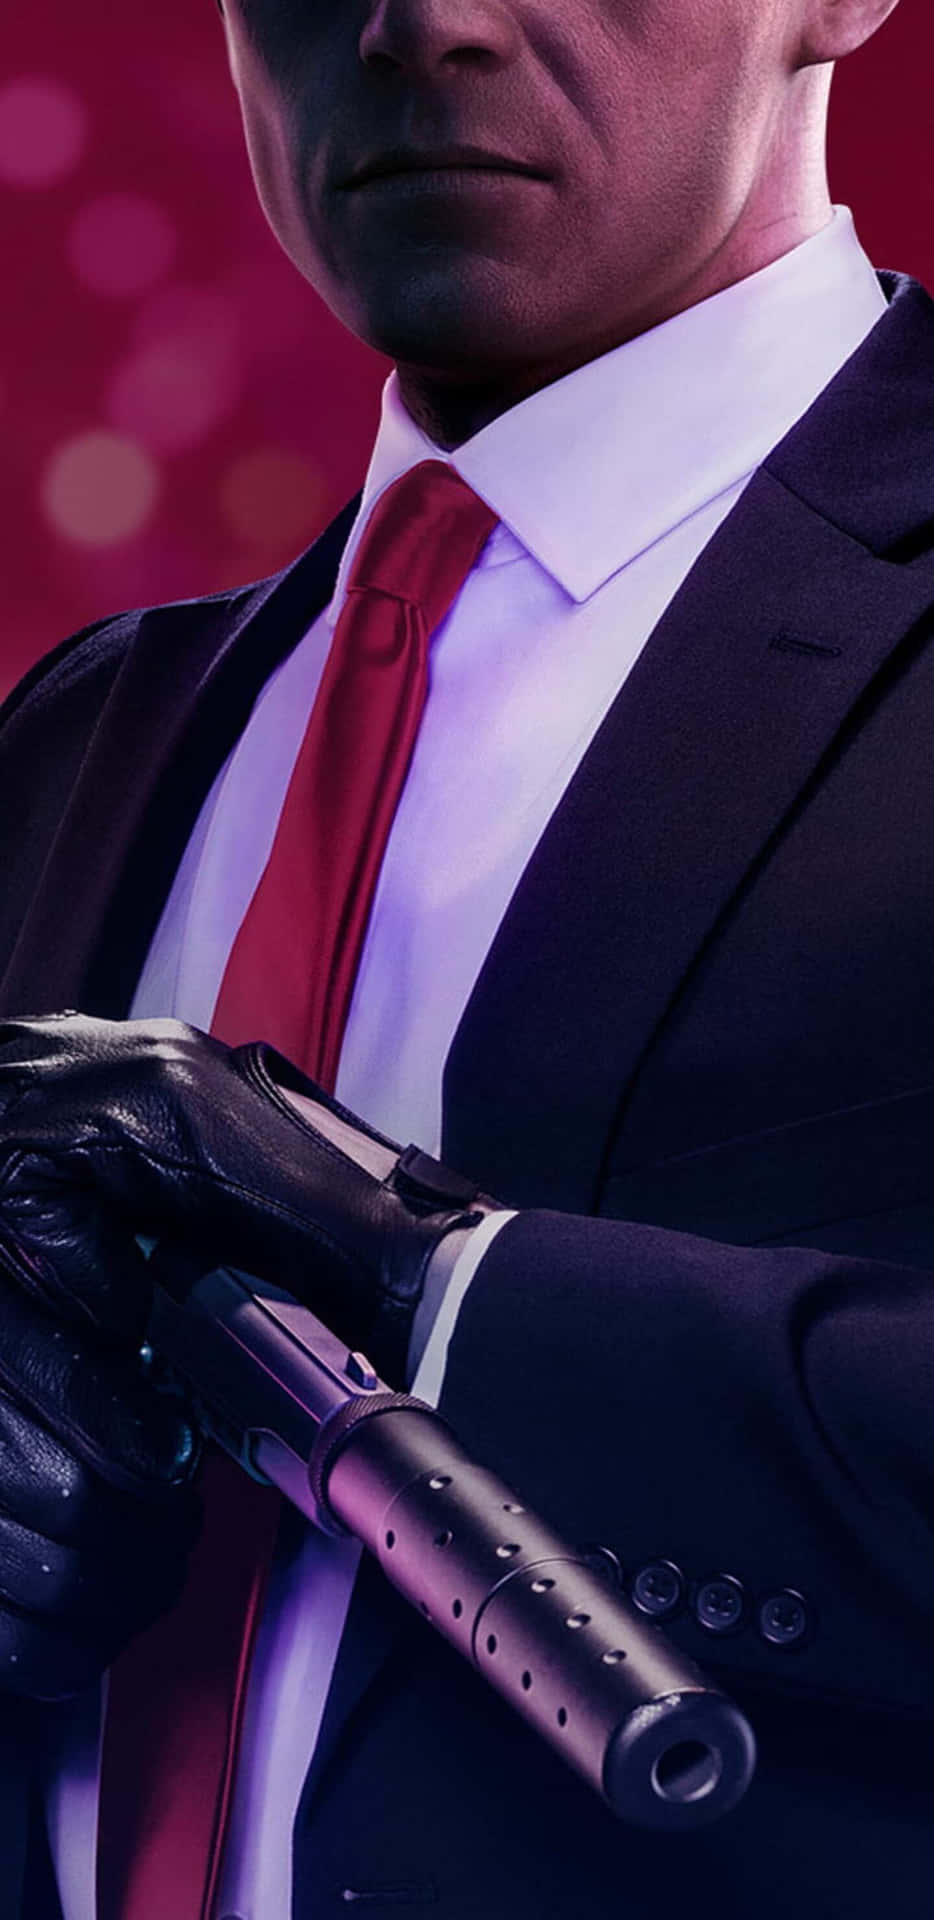 A Man In A Suit Holding A Gun